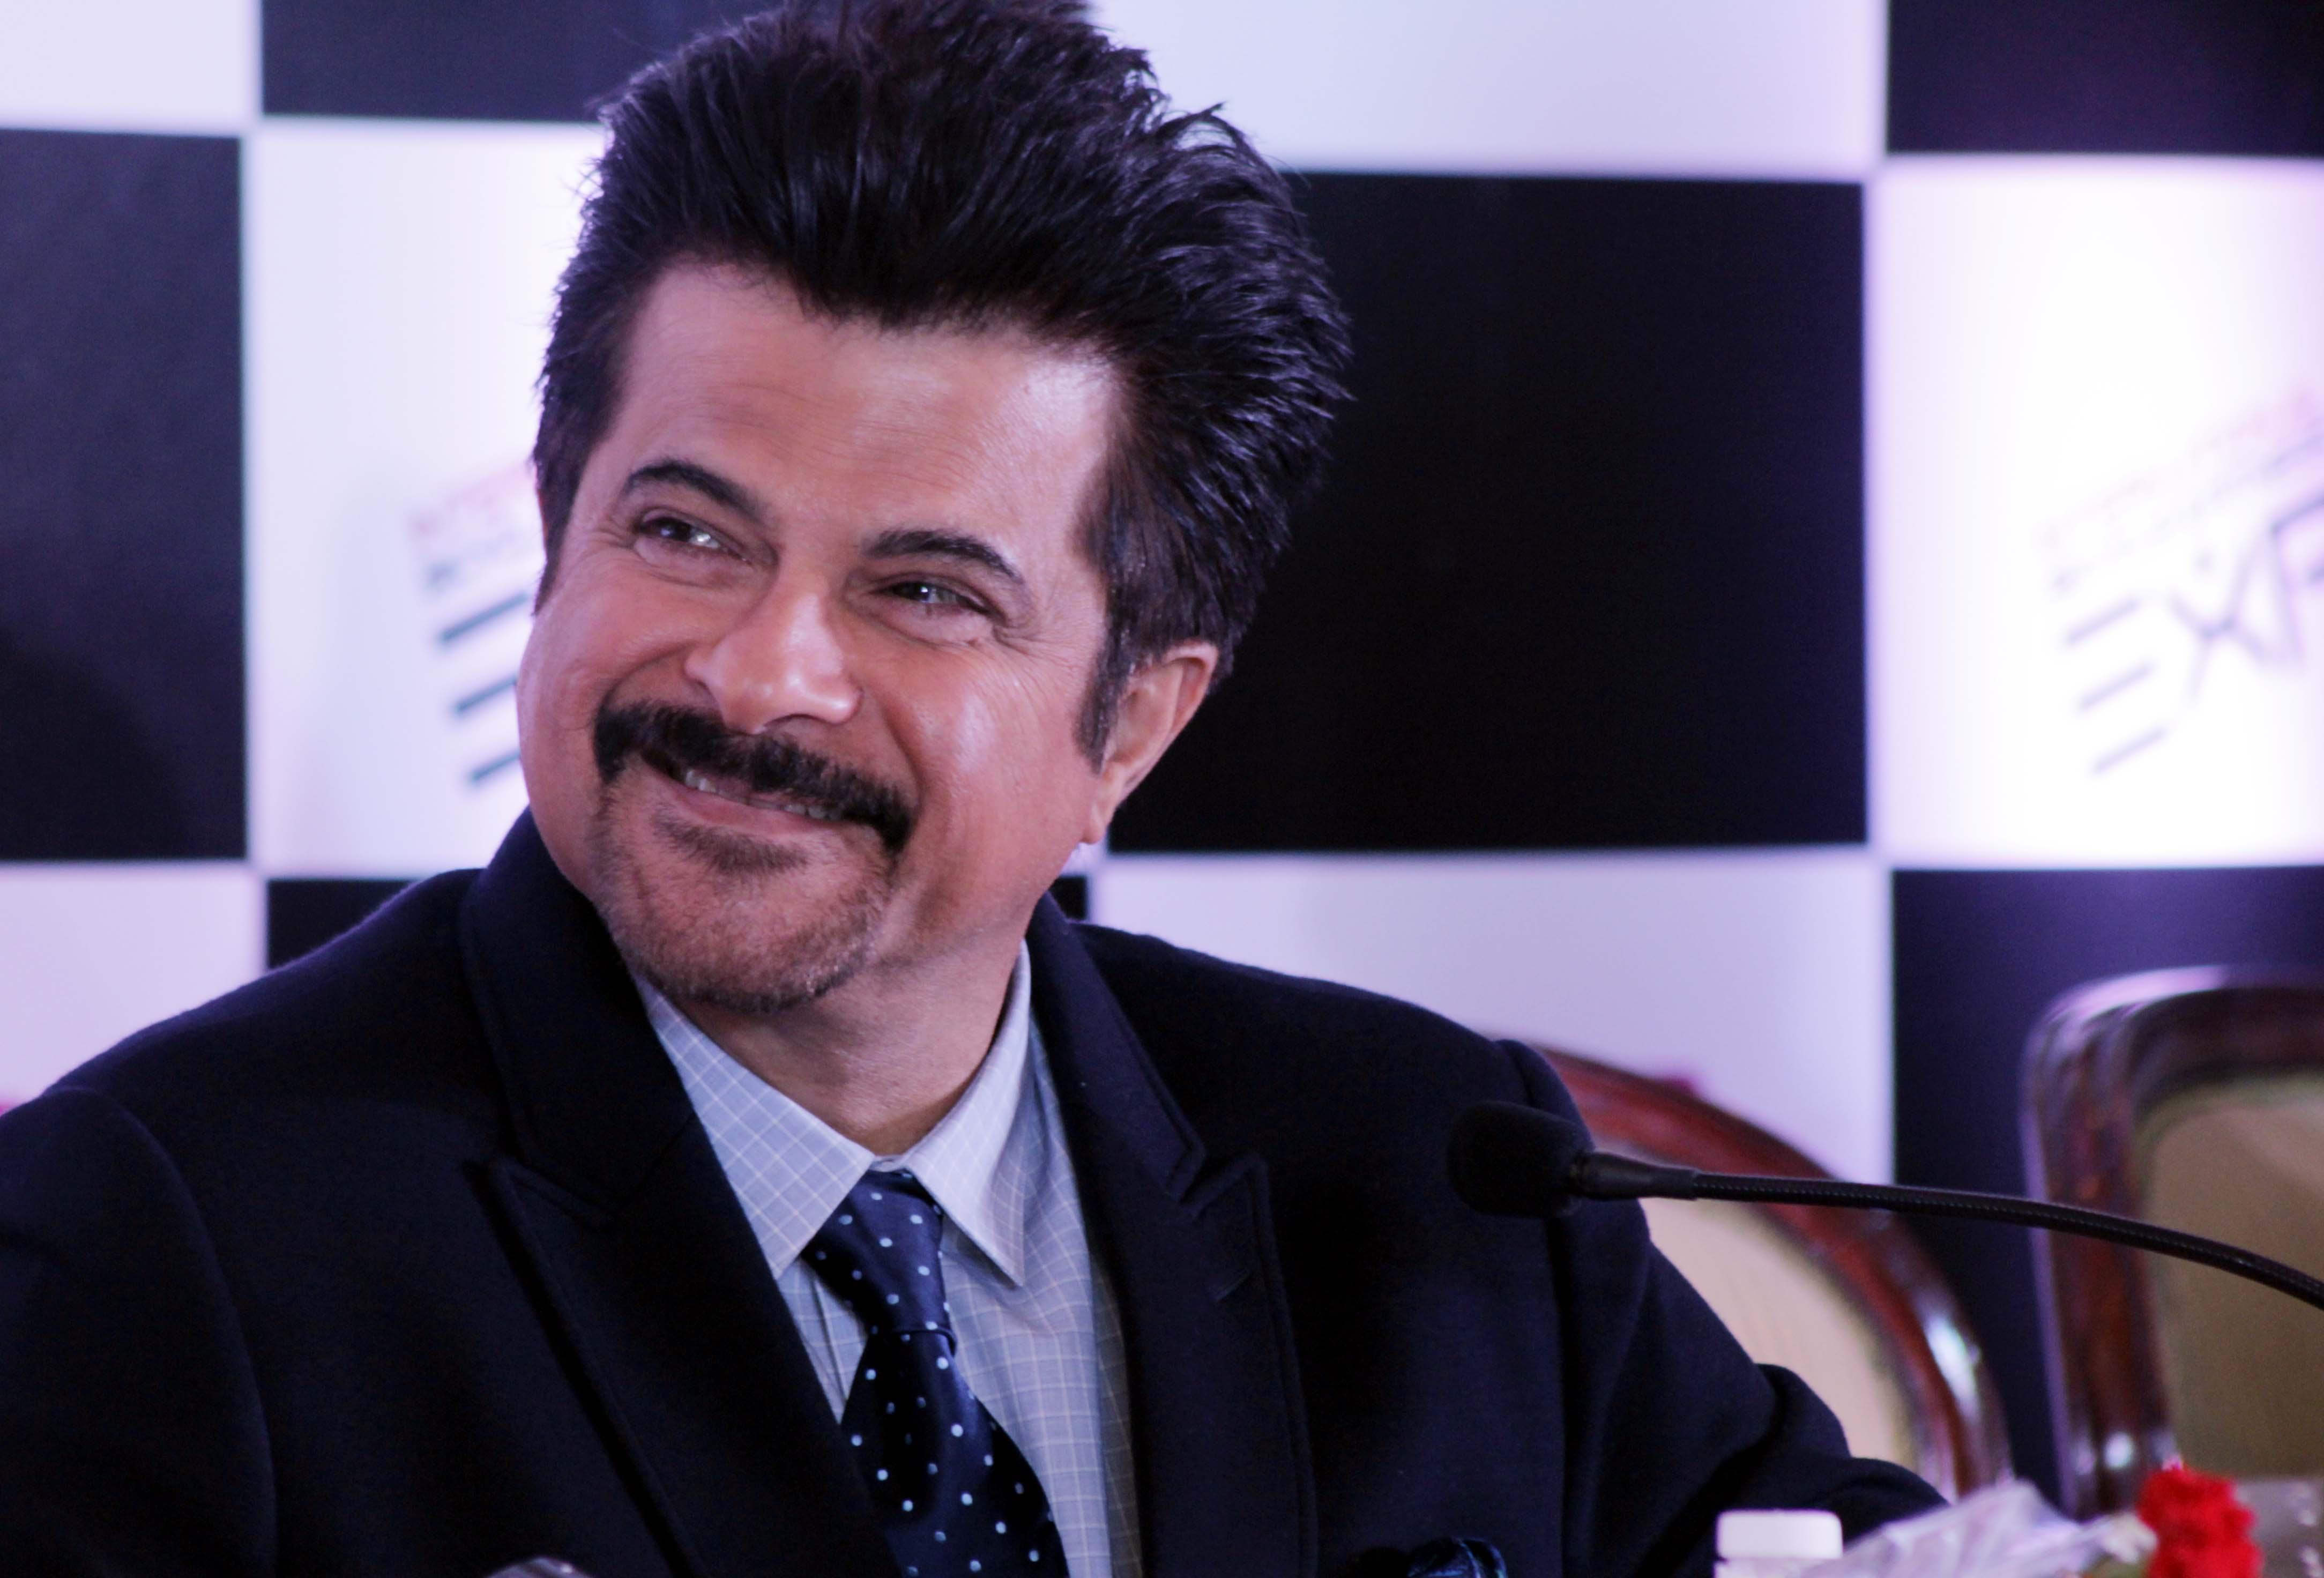 Smiling Face Of Actor Anil Kapoor